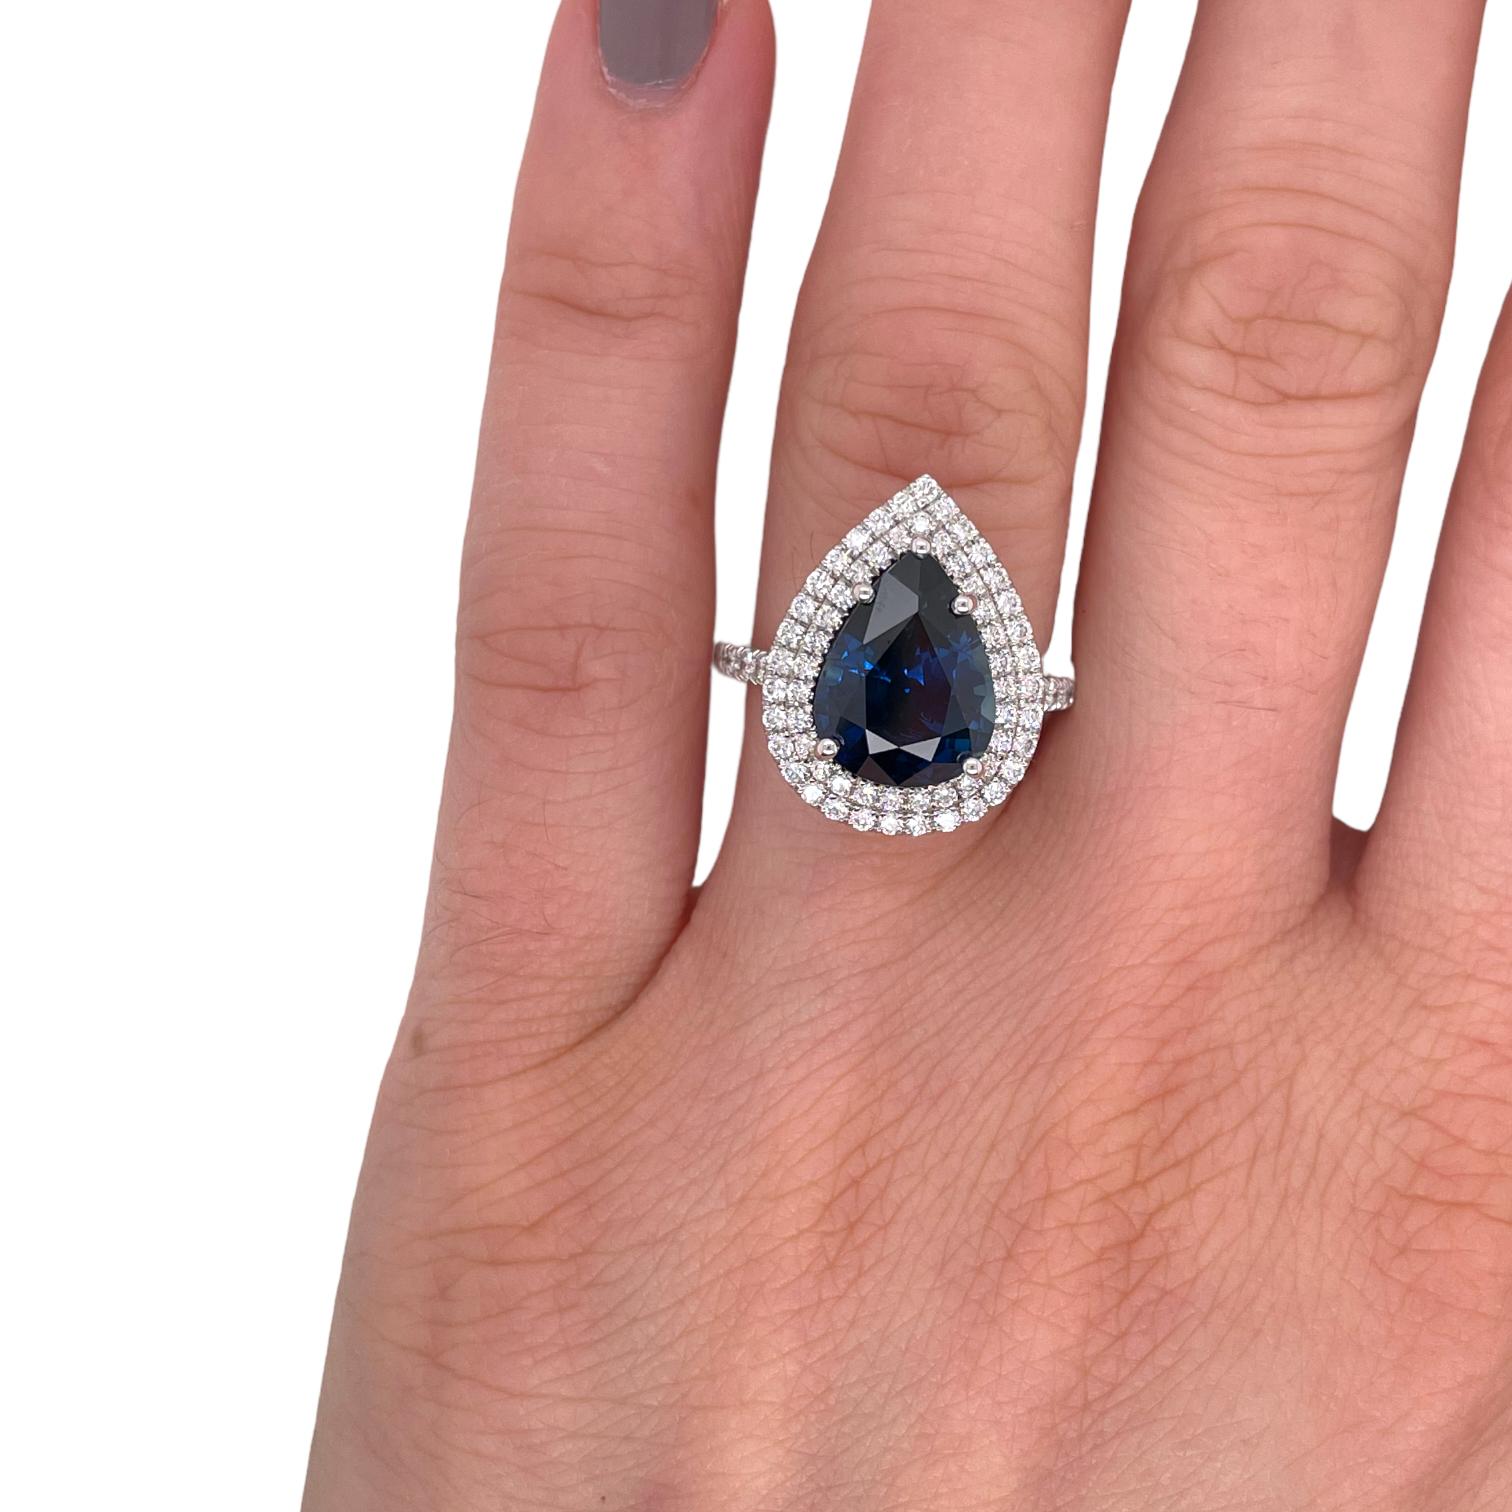 Ring contains one GIA certified pear shape sapphire 5.81ct and round brilliant diamonds surrounding 0.73tcw. Sapphire and diamonds are mounted in a handmade basket prong setting. Diamonds are F in color and VS2 in clarity. Ring is a size 6.25 and